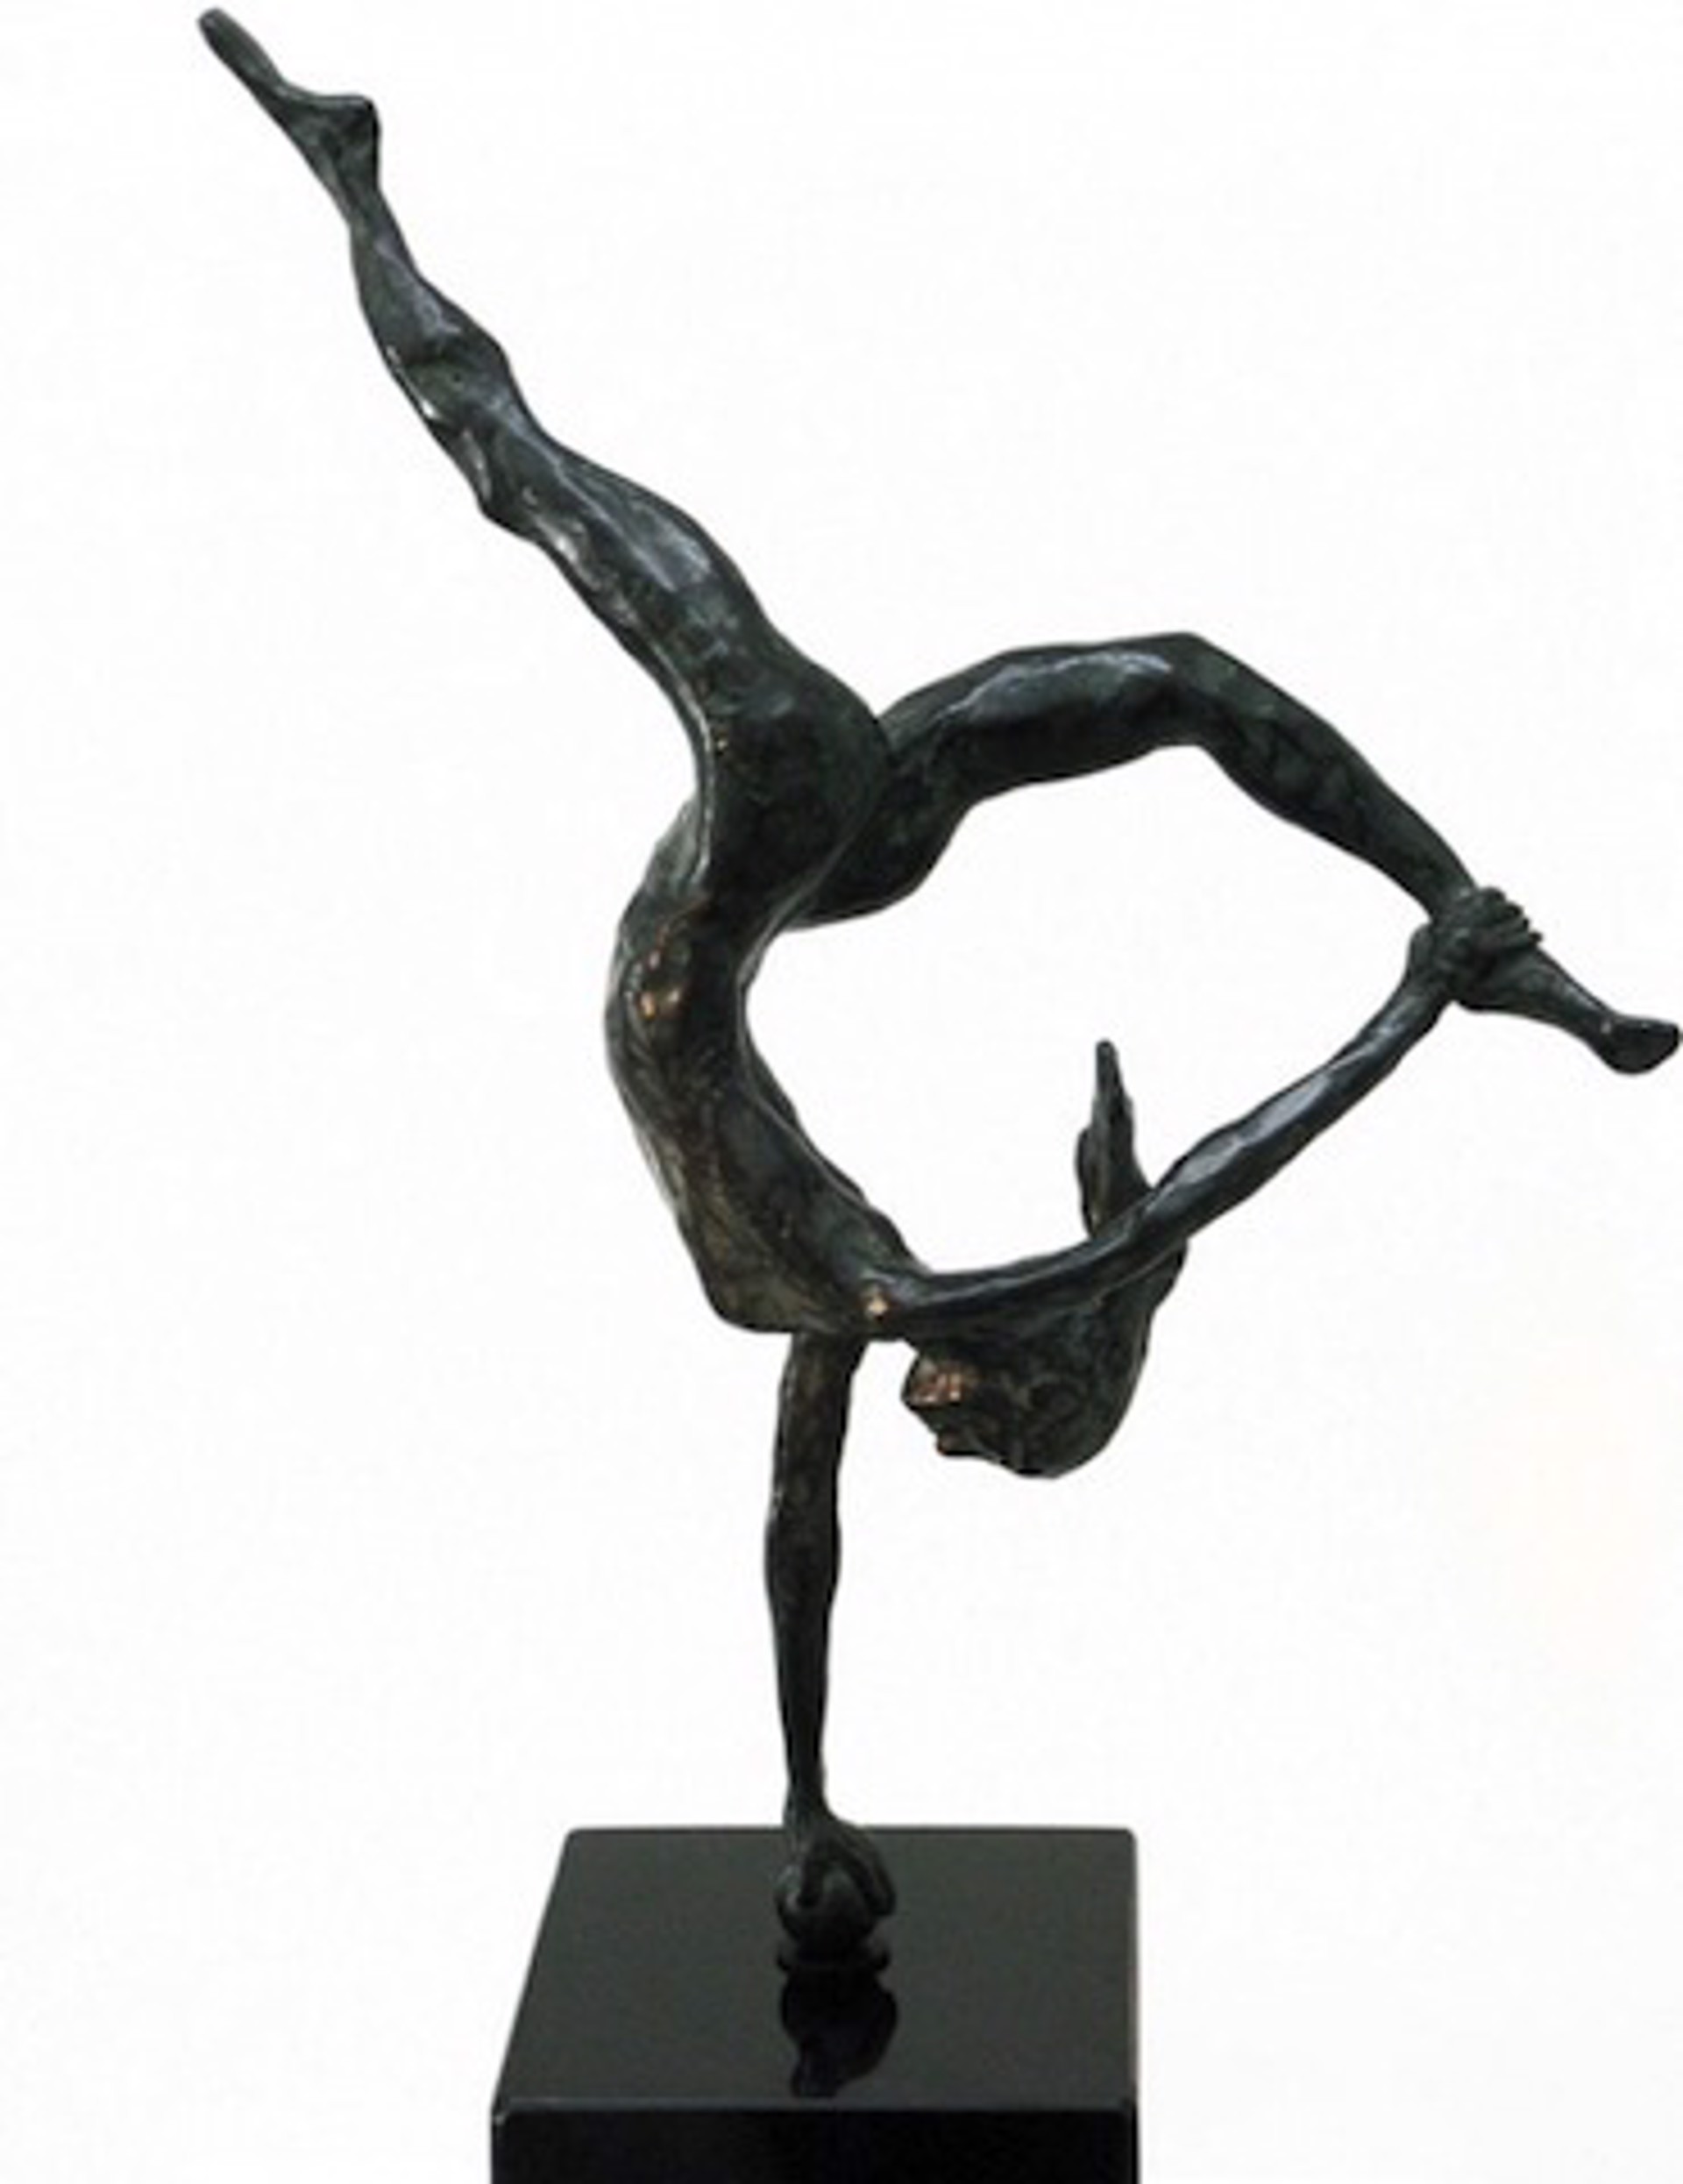 Dancer on Ball by Don Wilks